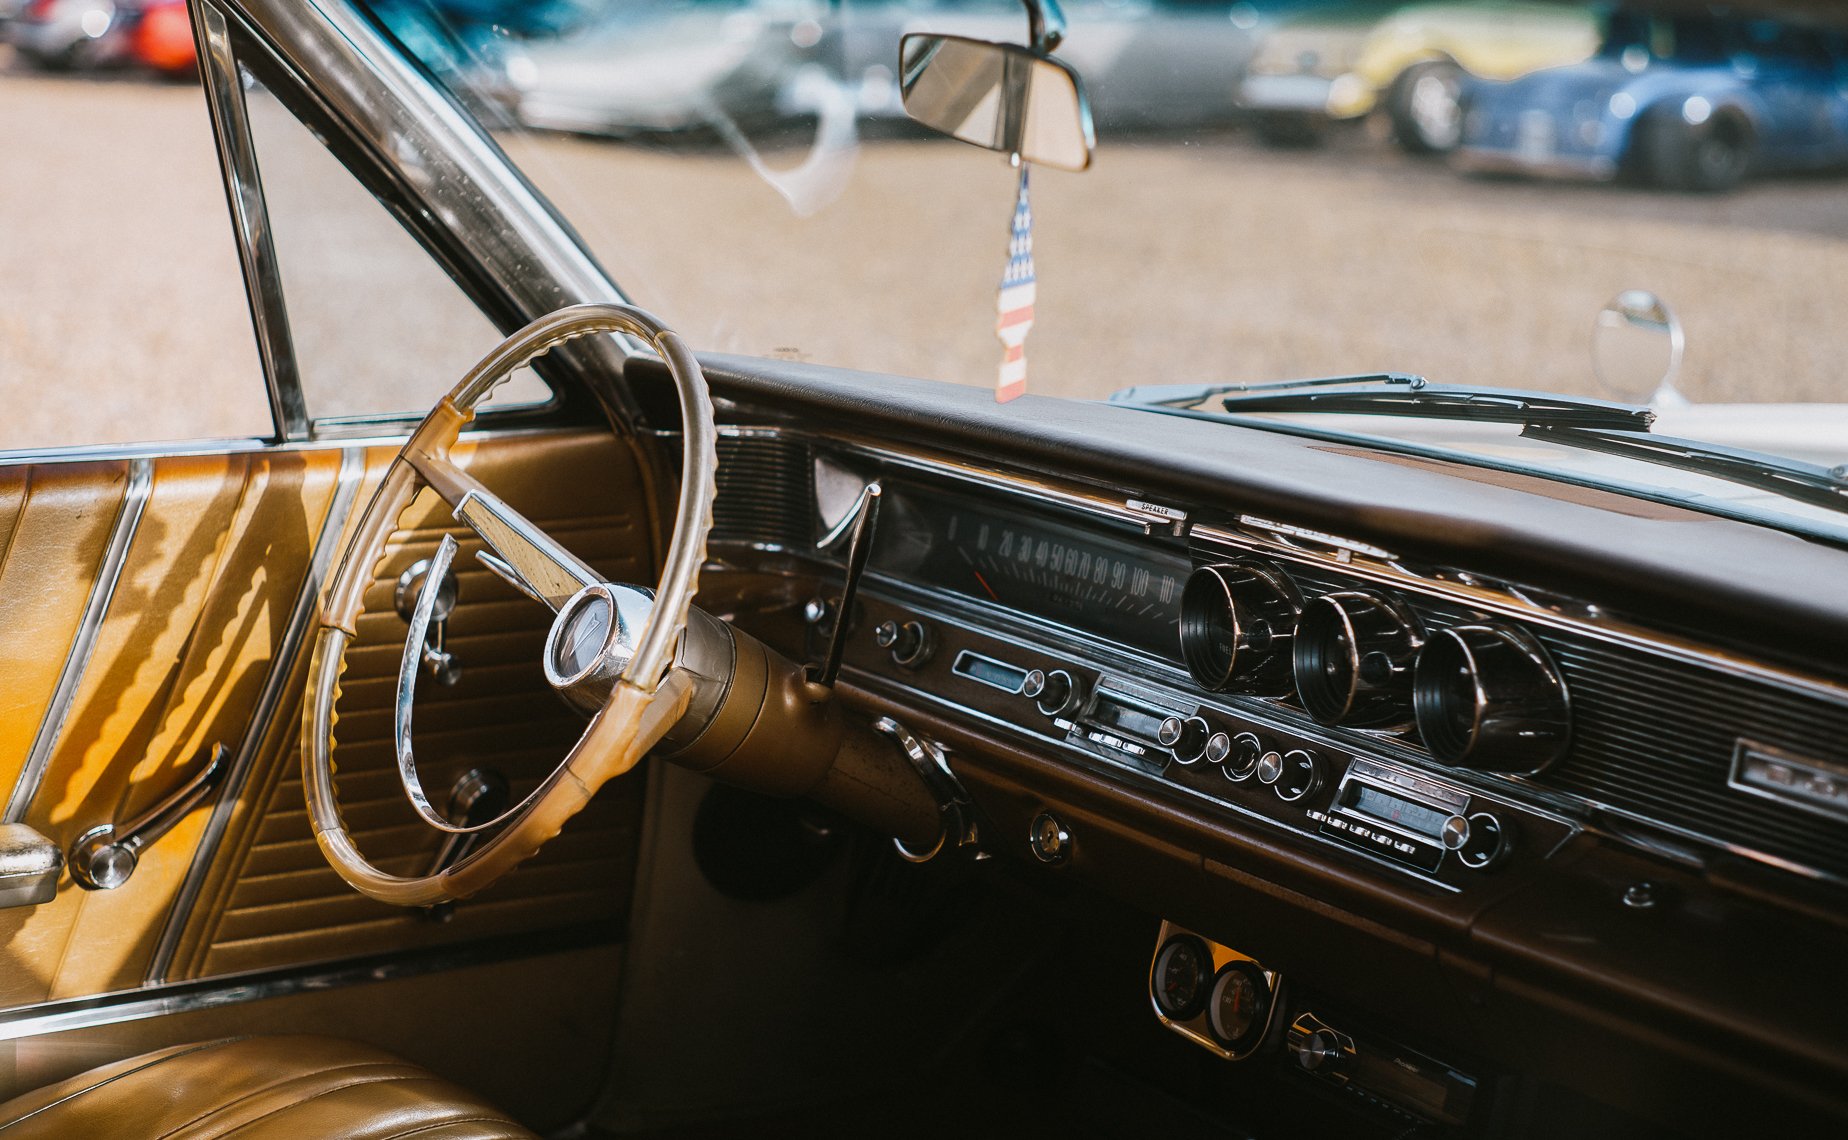 The interior dashboard of of a classic car at sunset